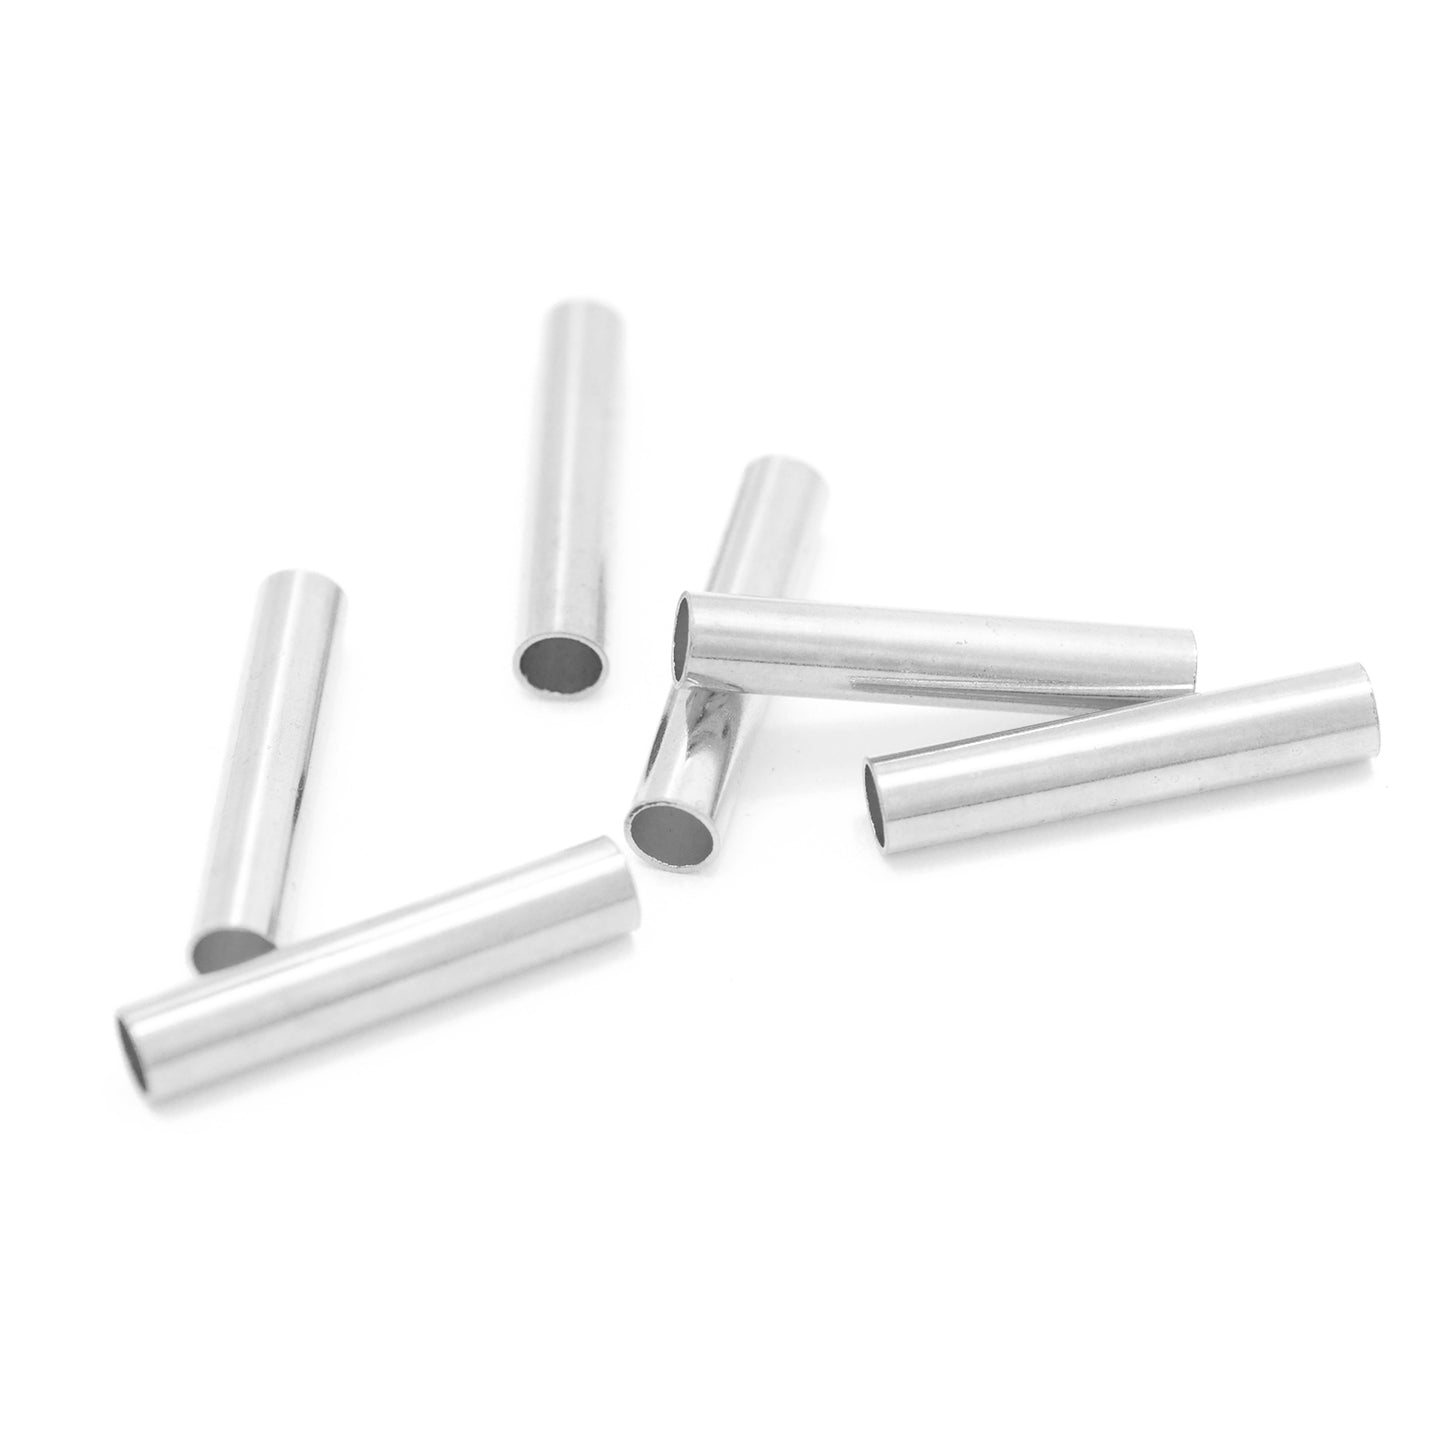 Metal tubes / silver colored / 25 mm